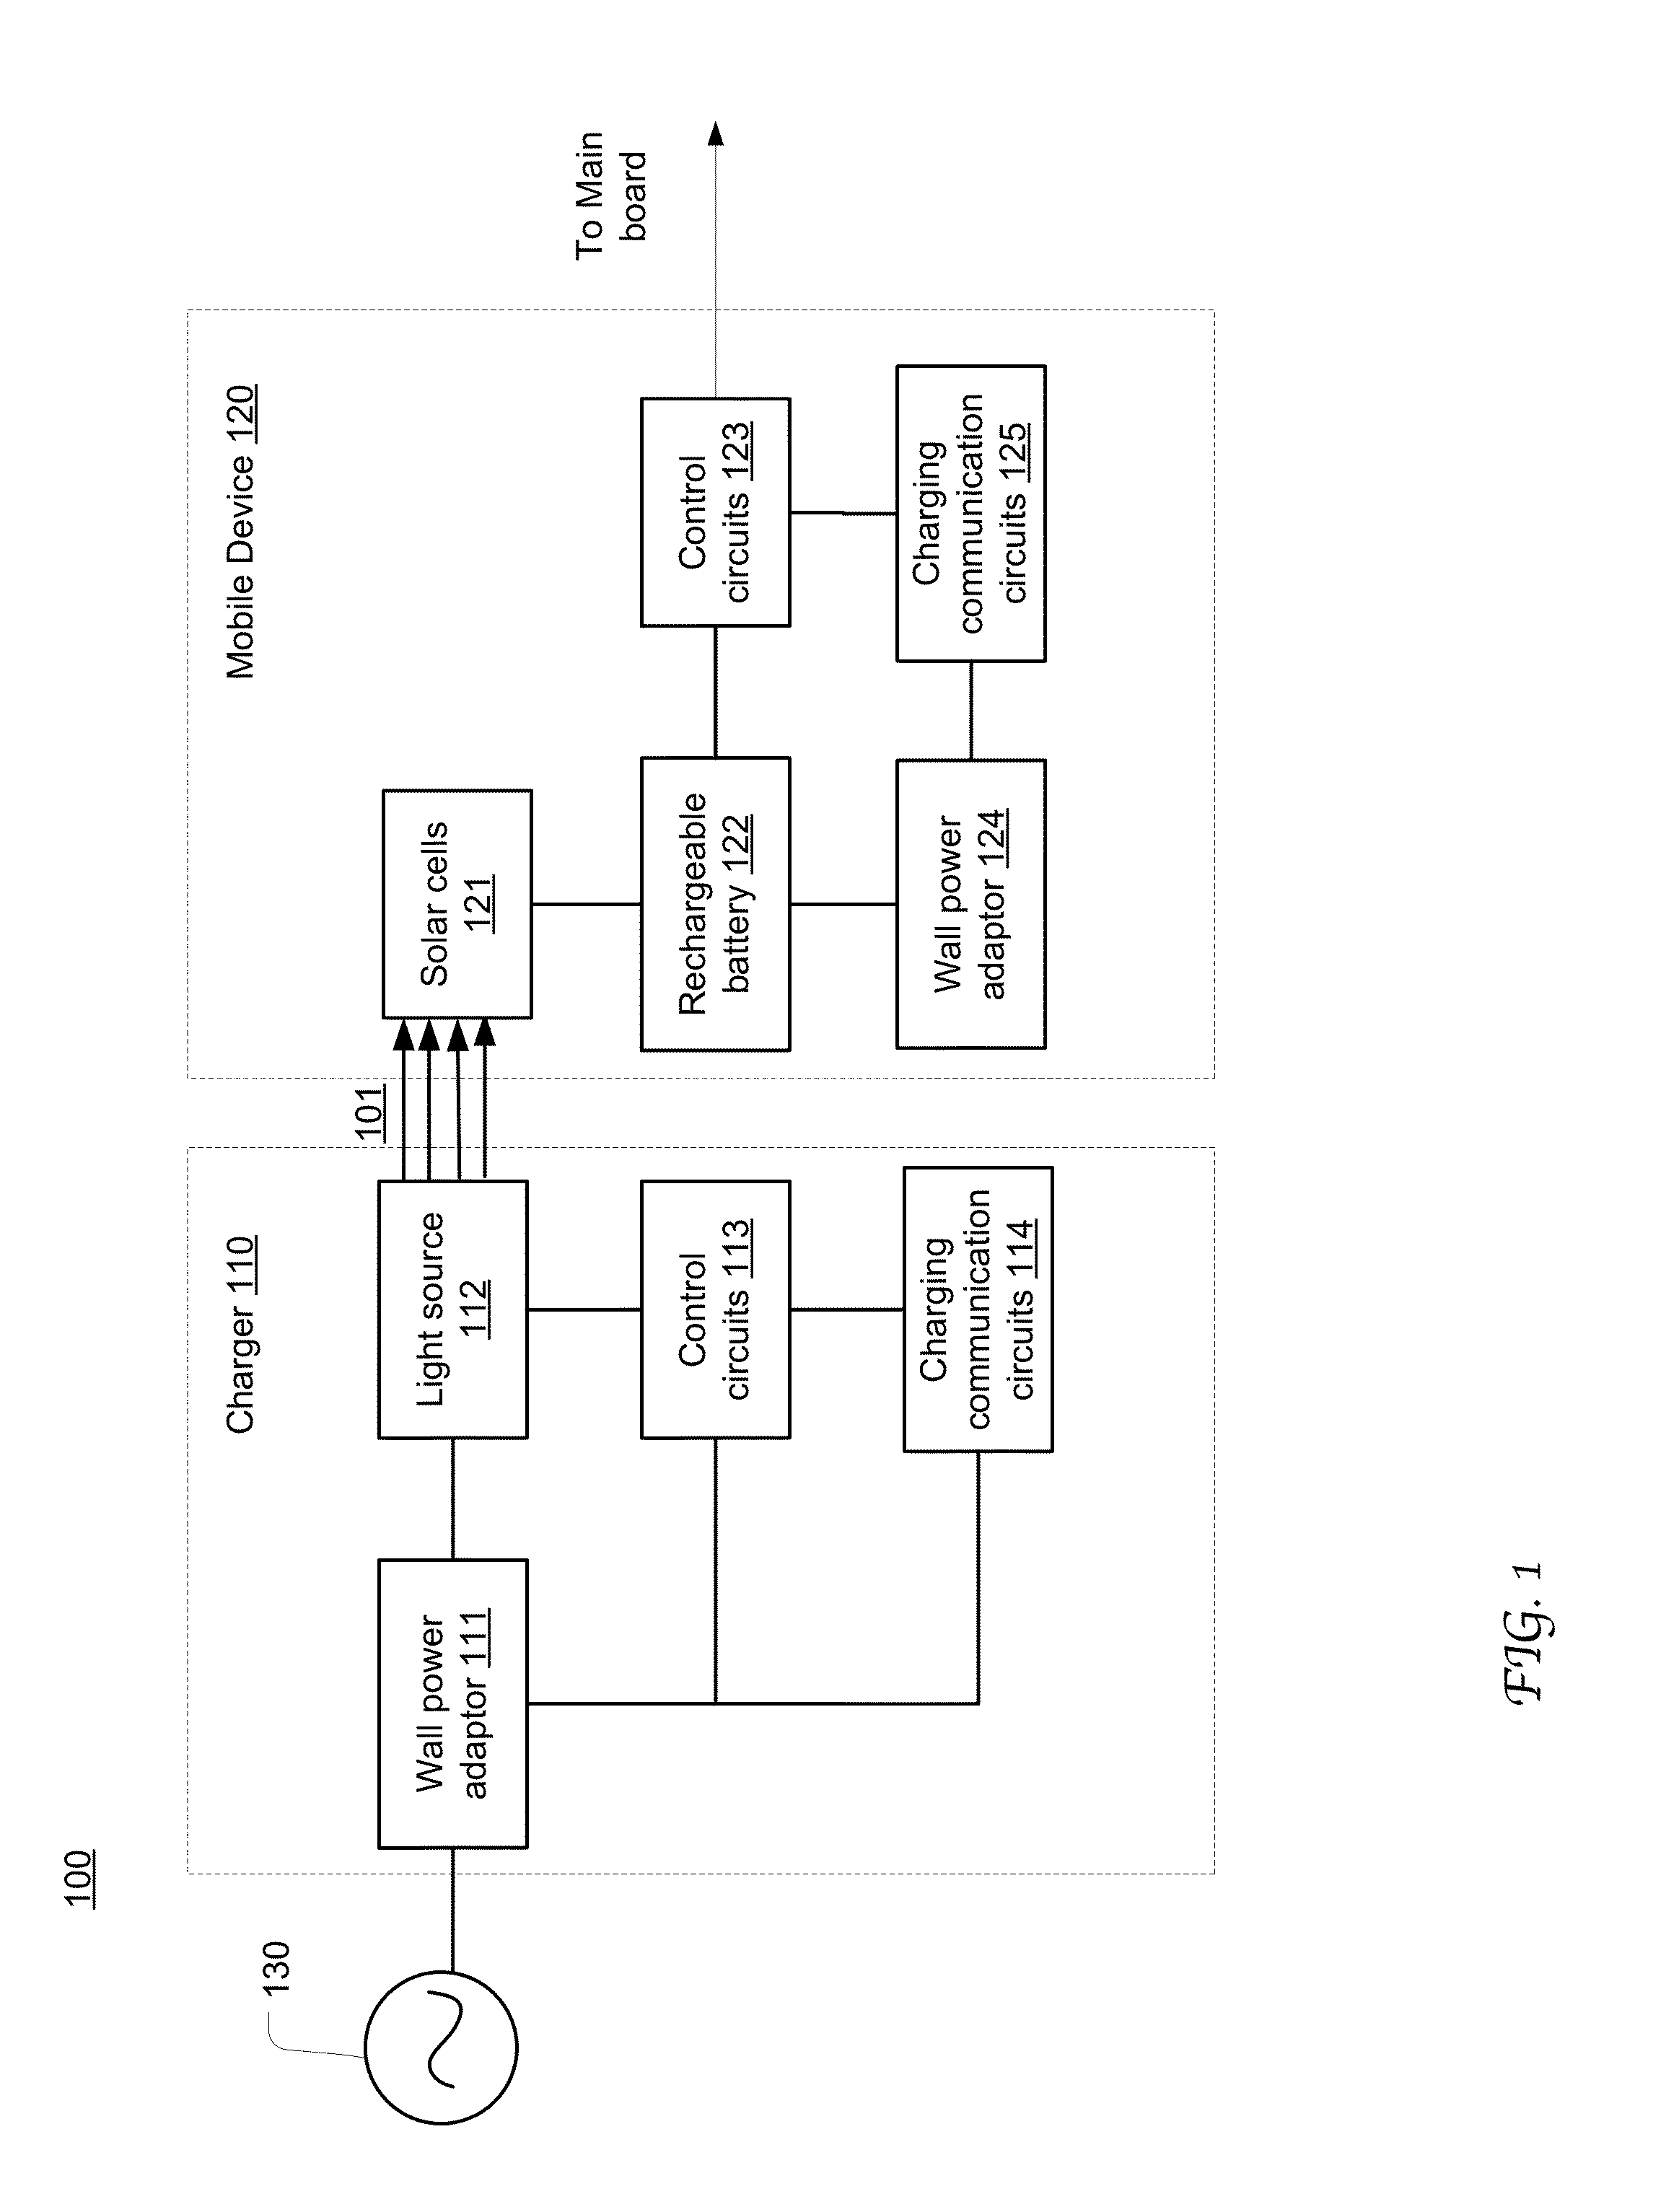 Charging station for mobile device with solar panel